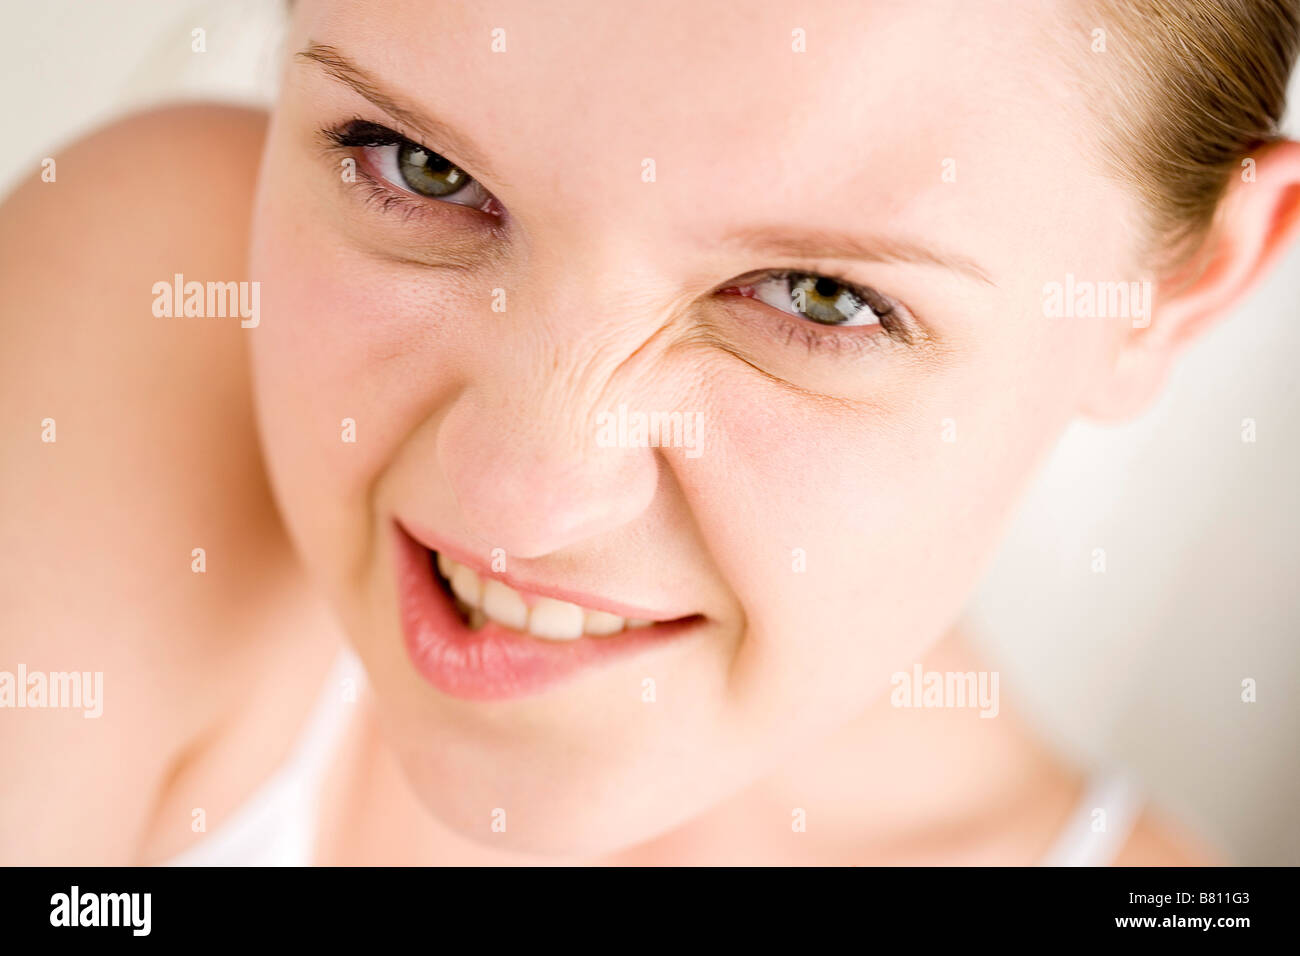 Young woman laughing and squinching up nose close up Stock Photo